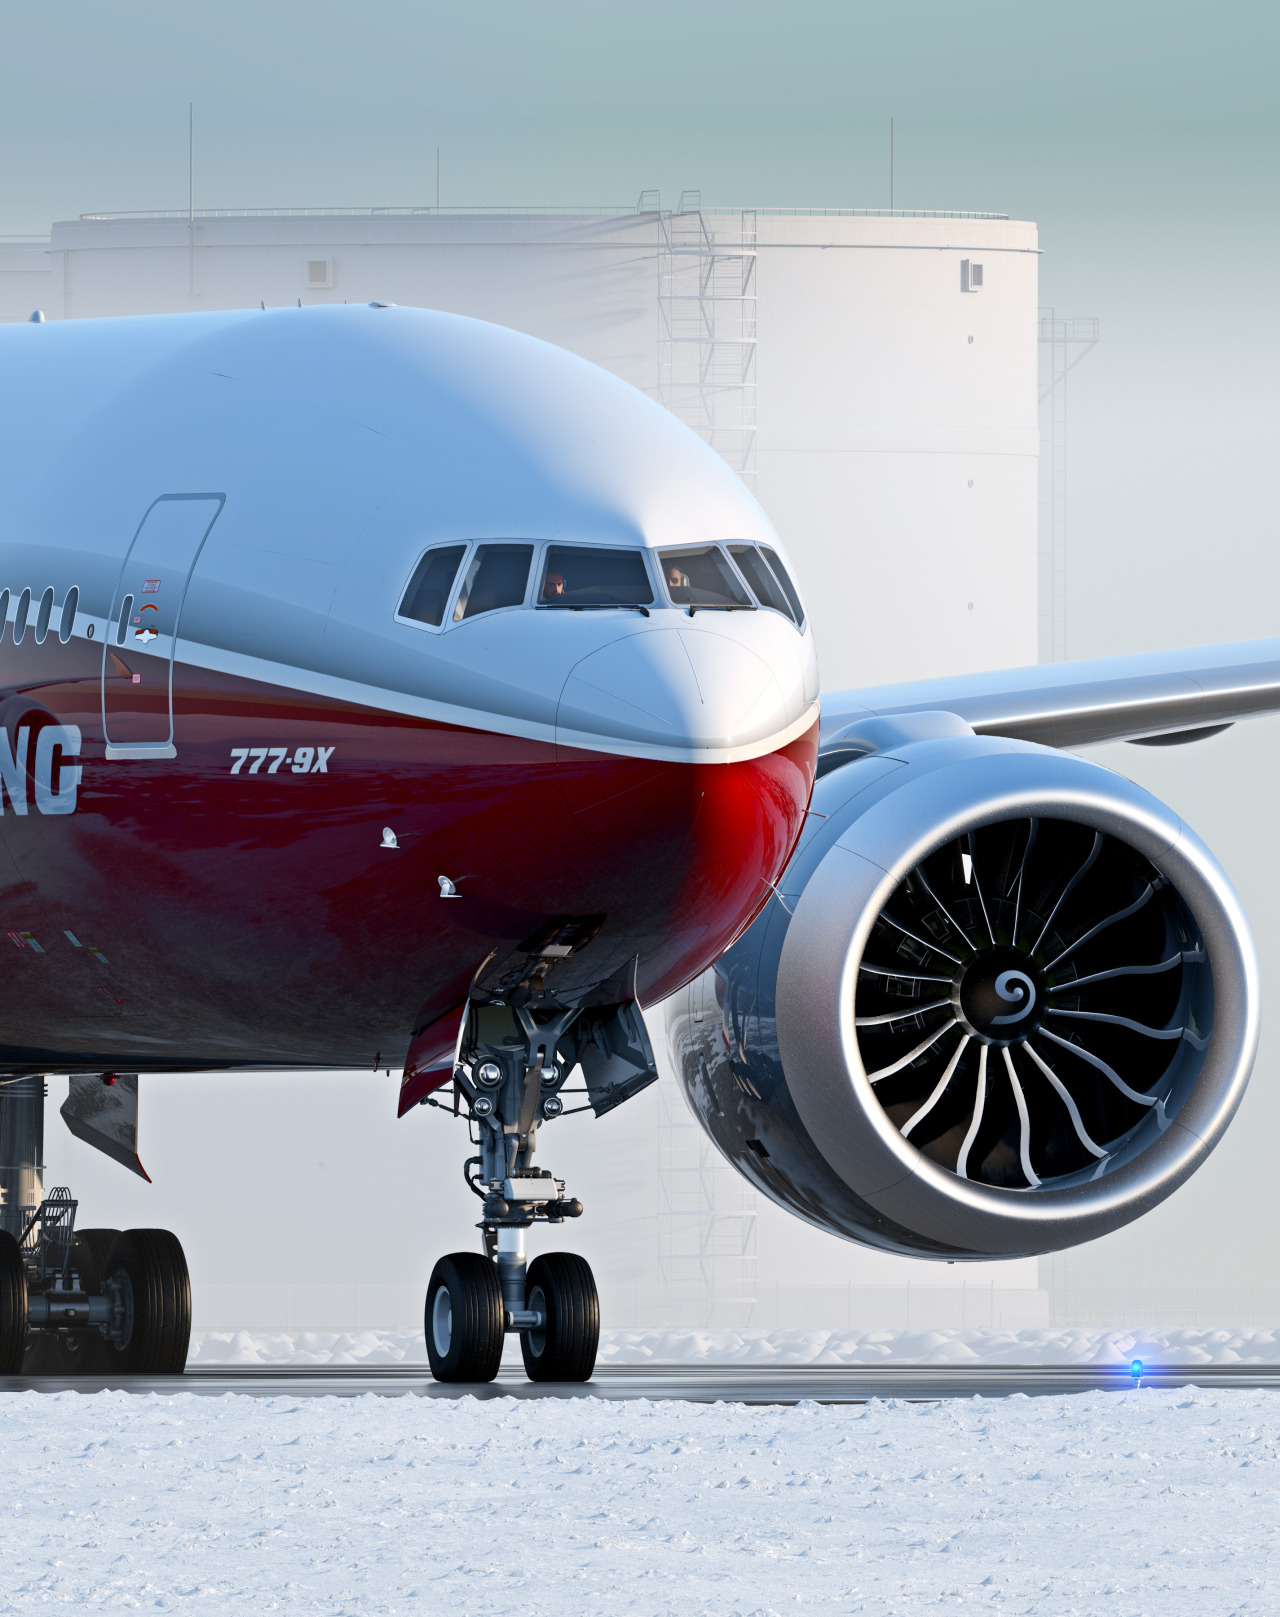 fedair:
“ v1-rotate-v2:
“ Nov 17, 2013, Boeing officaly launched 777-X Program
**Large resolution**
Source: Boeing
”
Woooooooow ! Amazing
”